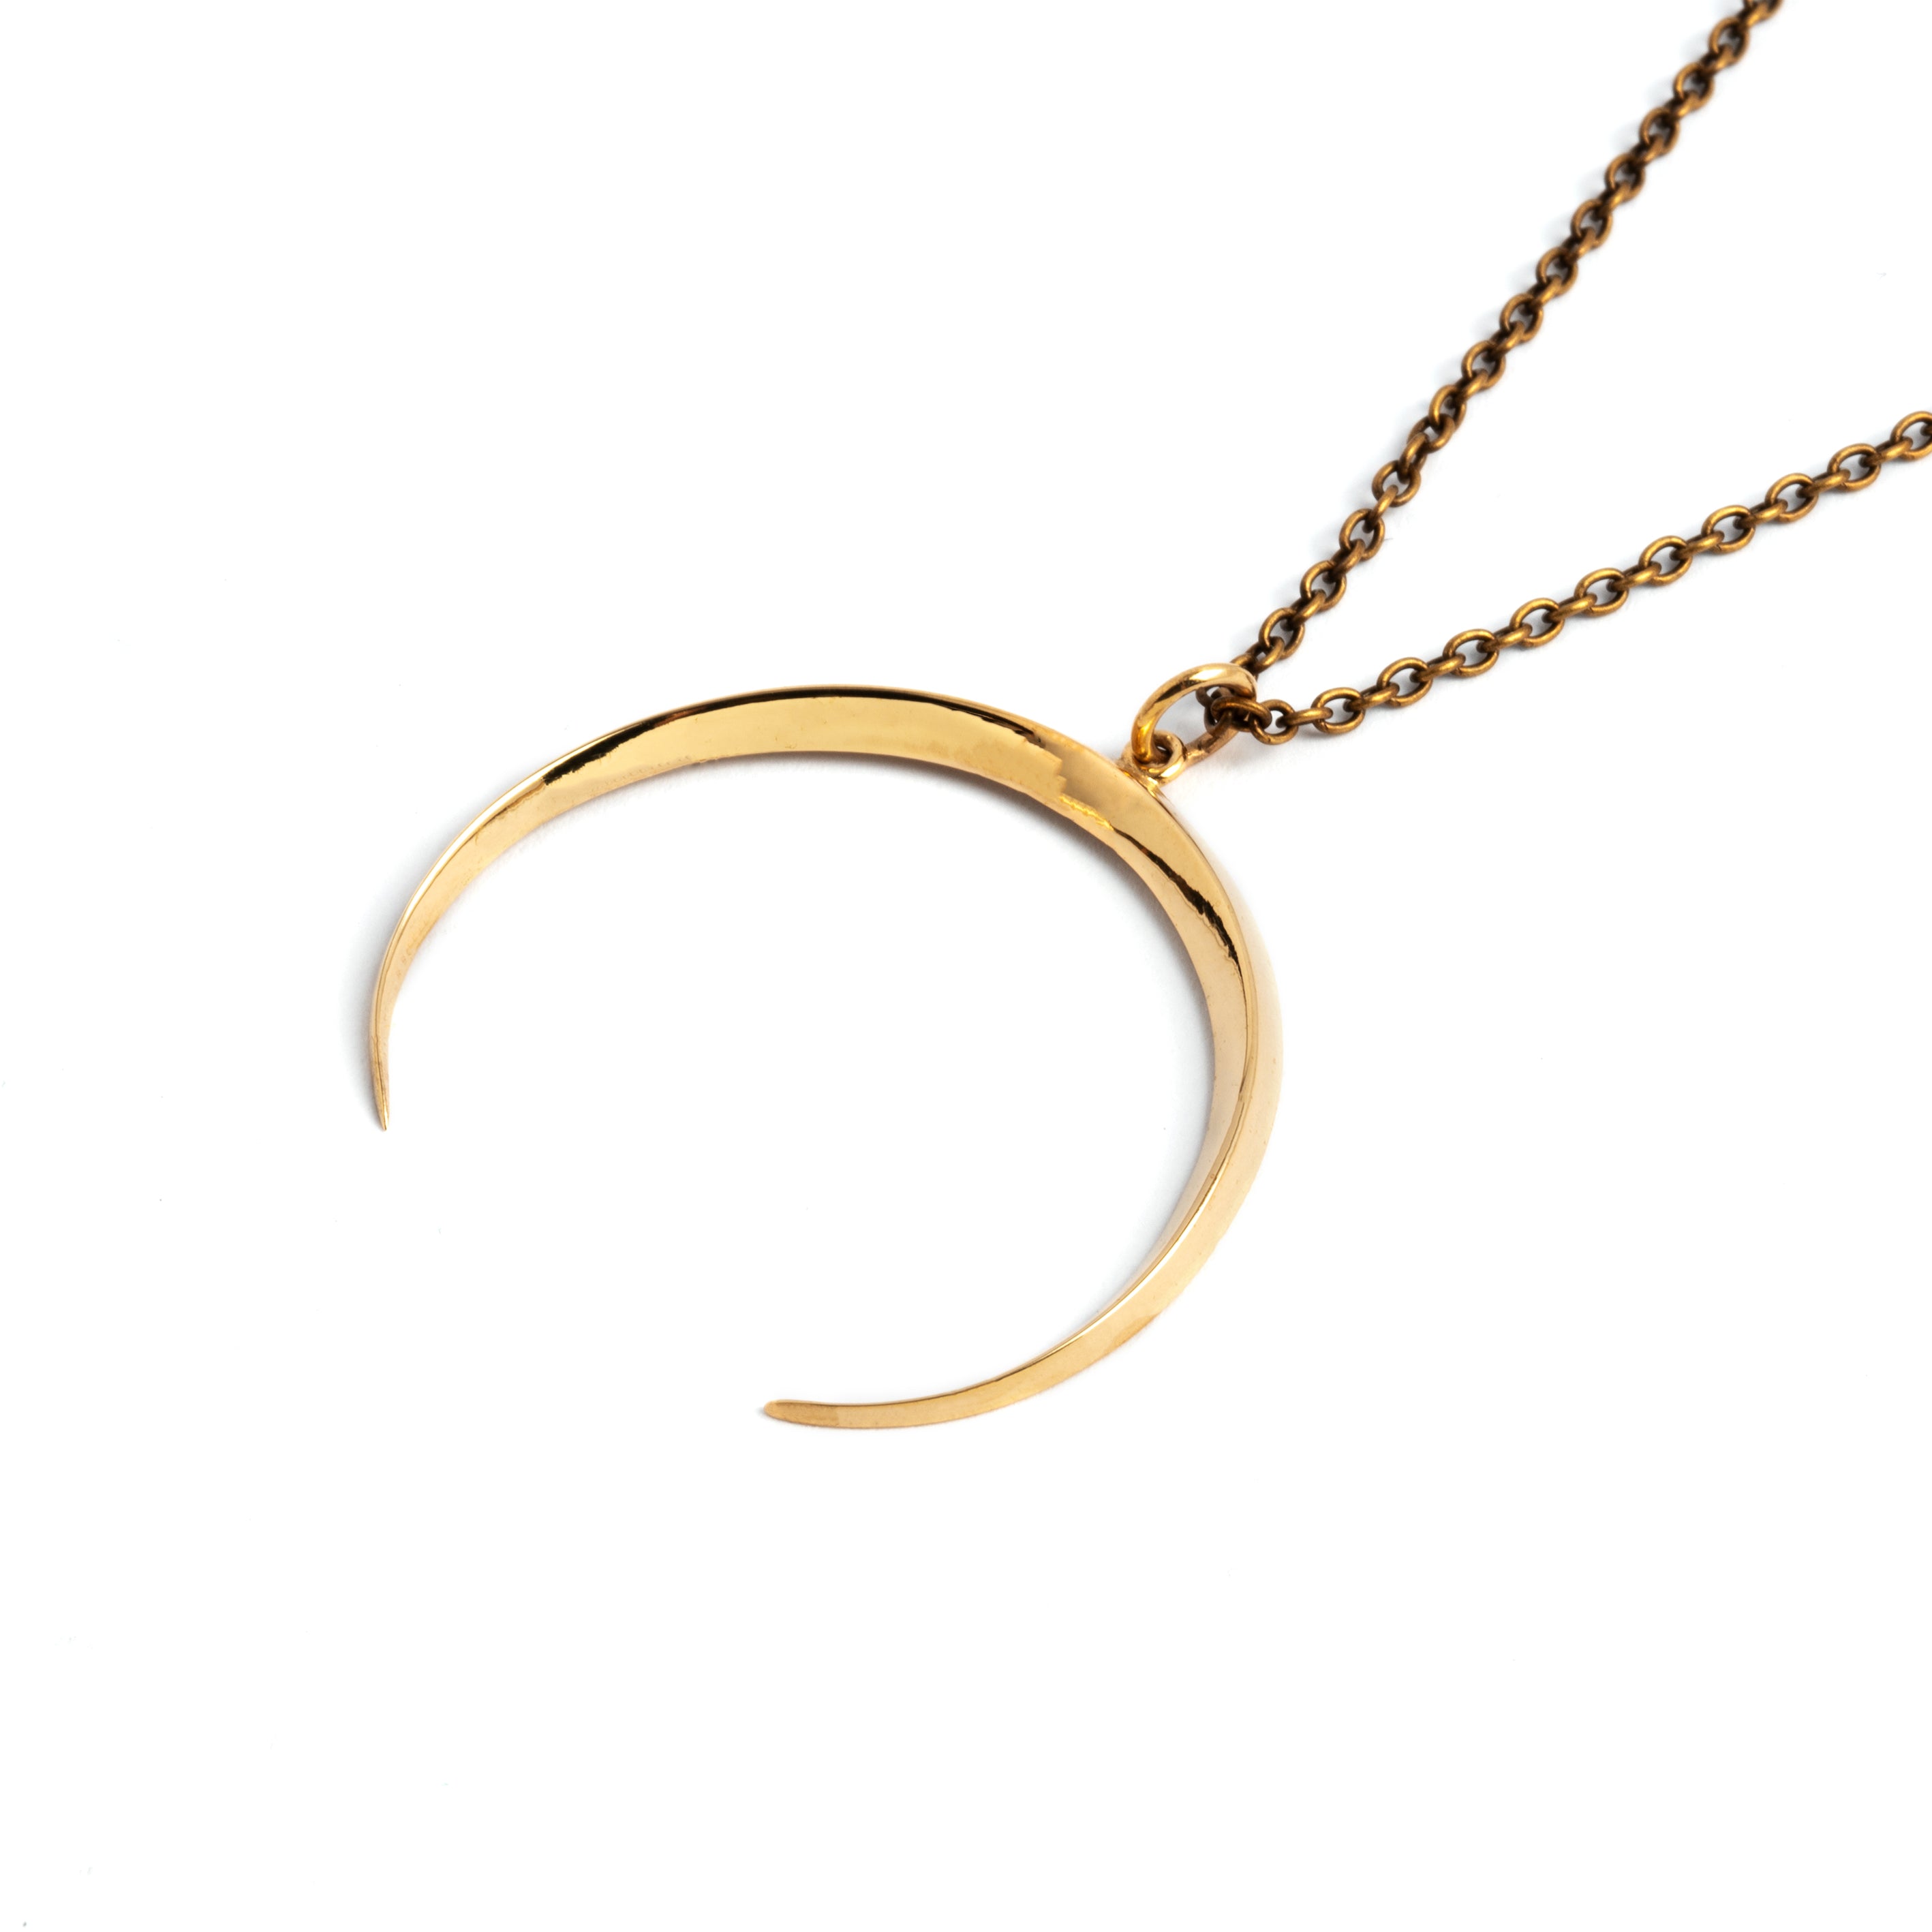 Crescent moon pendant necklace in bronze right side view